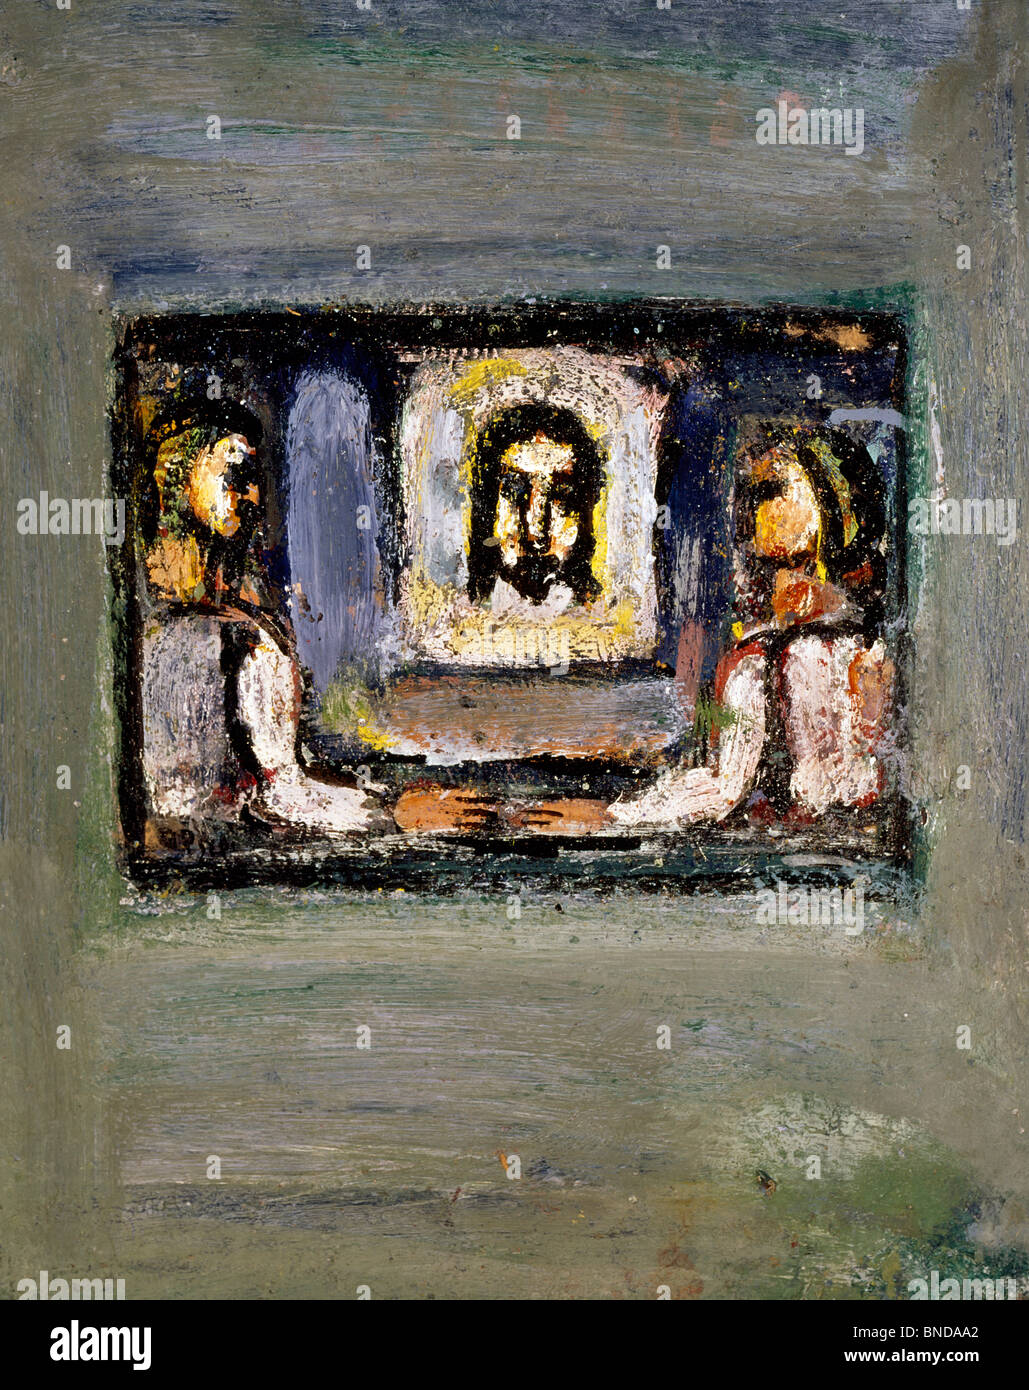 Scene of the Passion: Head of Christ Carried by Two People by Georges Rouault, (1871-1958), USA, Texas, Private Collection Stock Photo